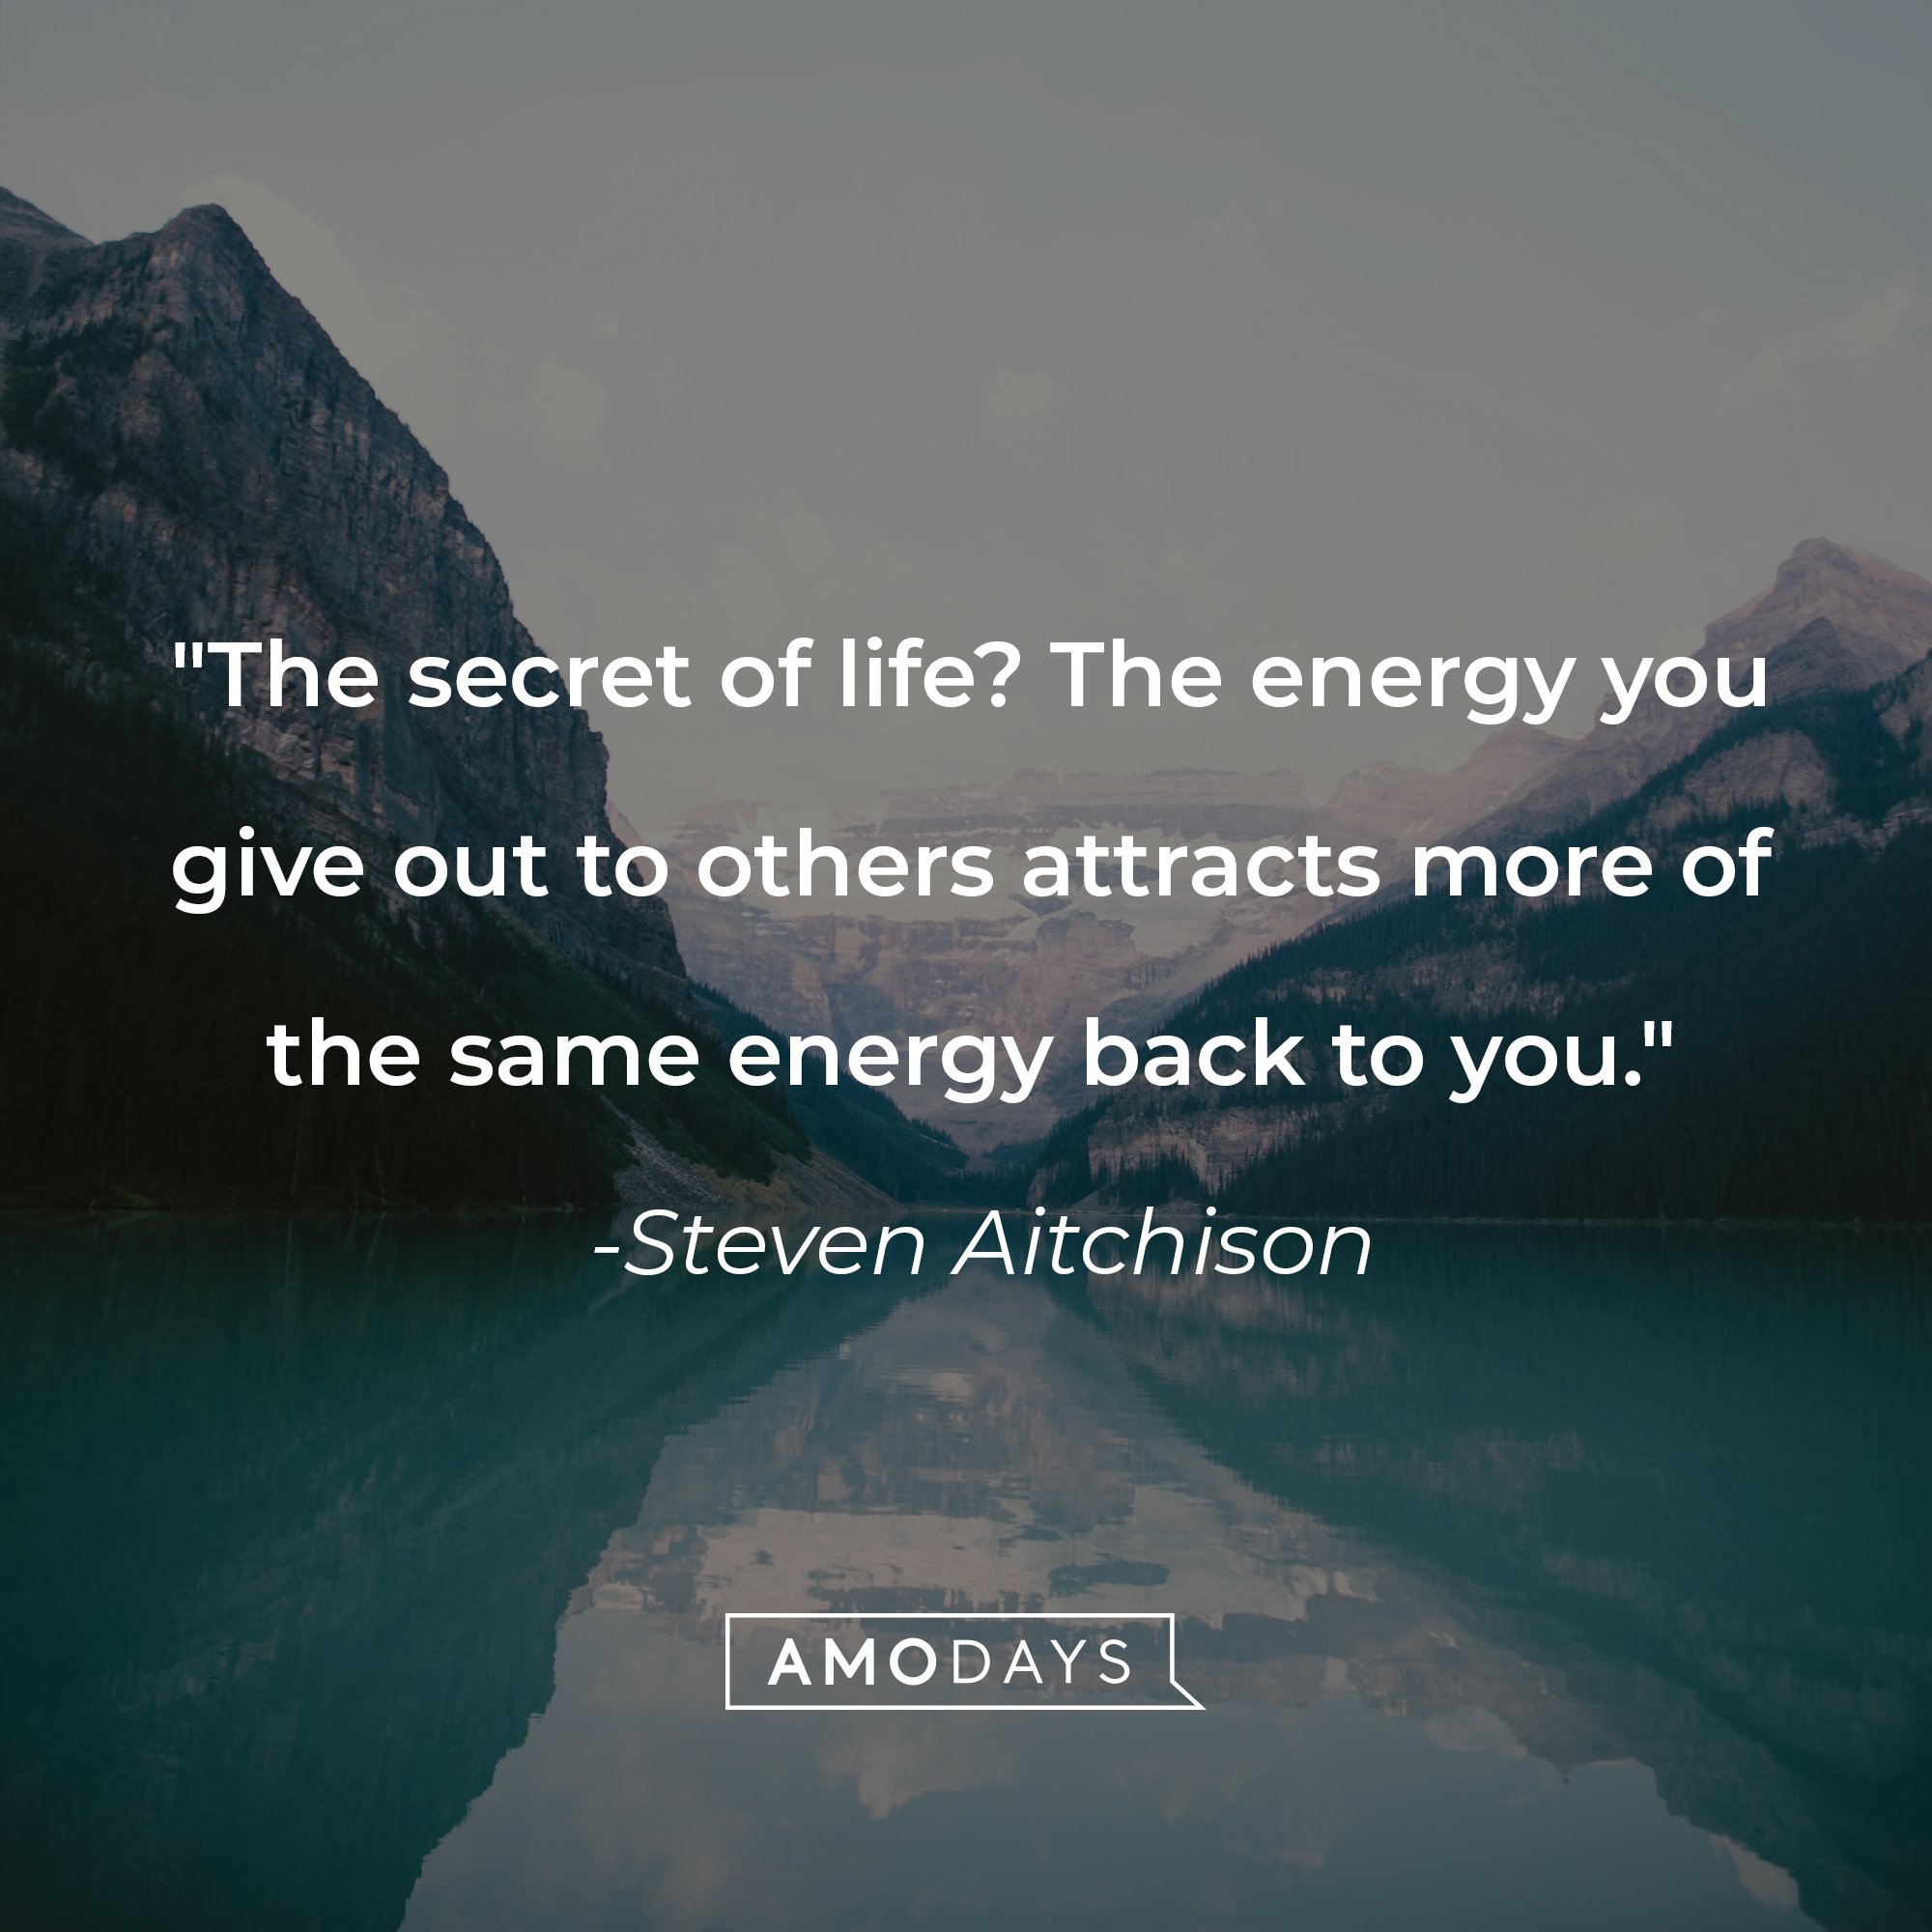 Steven Aitchison's quote: "The secret of life? The energy you give out to others attracts more of the same energy back to you." | Image: AmoDays